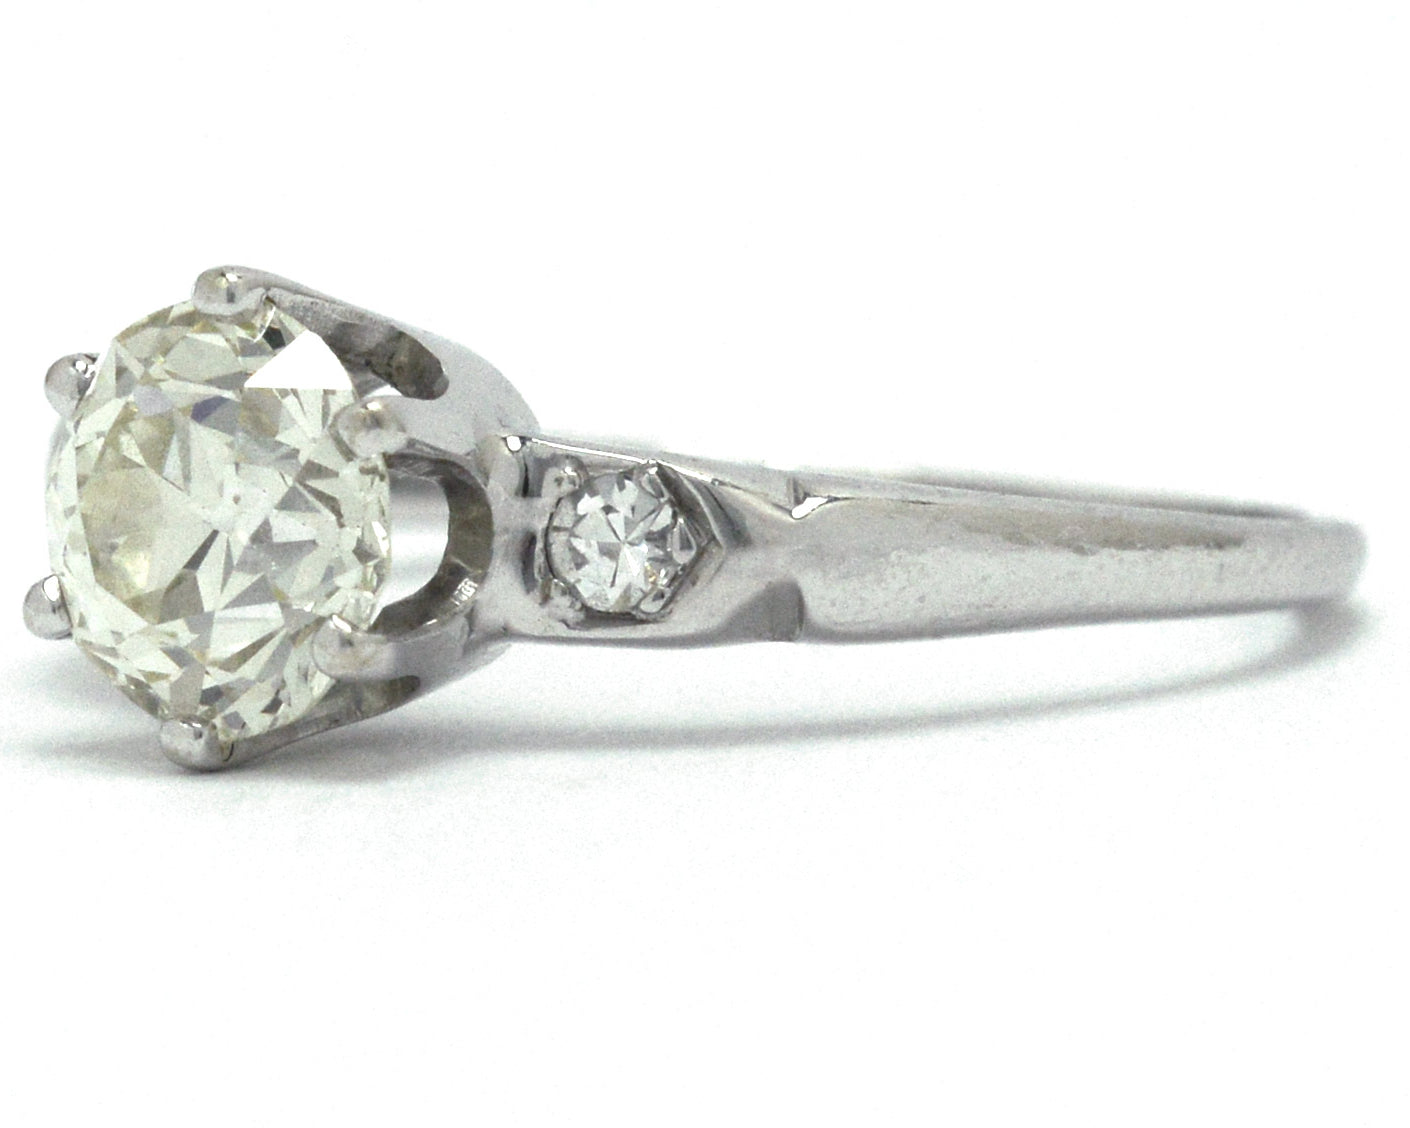 A Tiffany style solitaire engagement ring with a slightly yellow diamond.